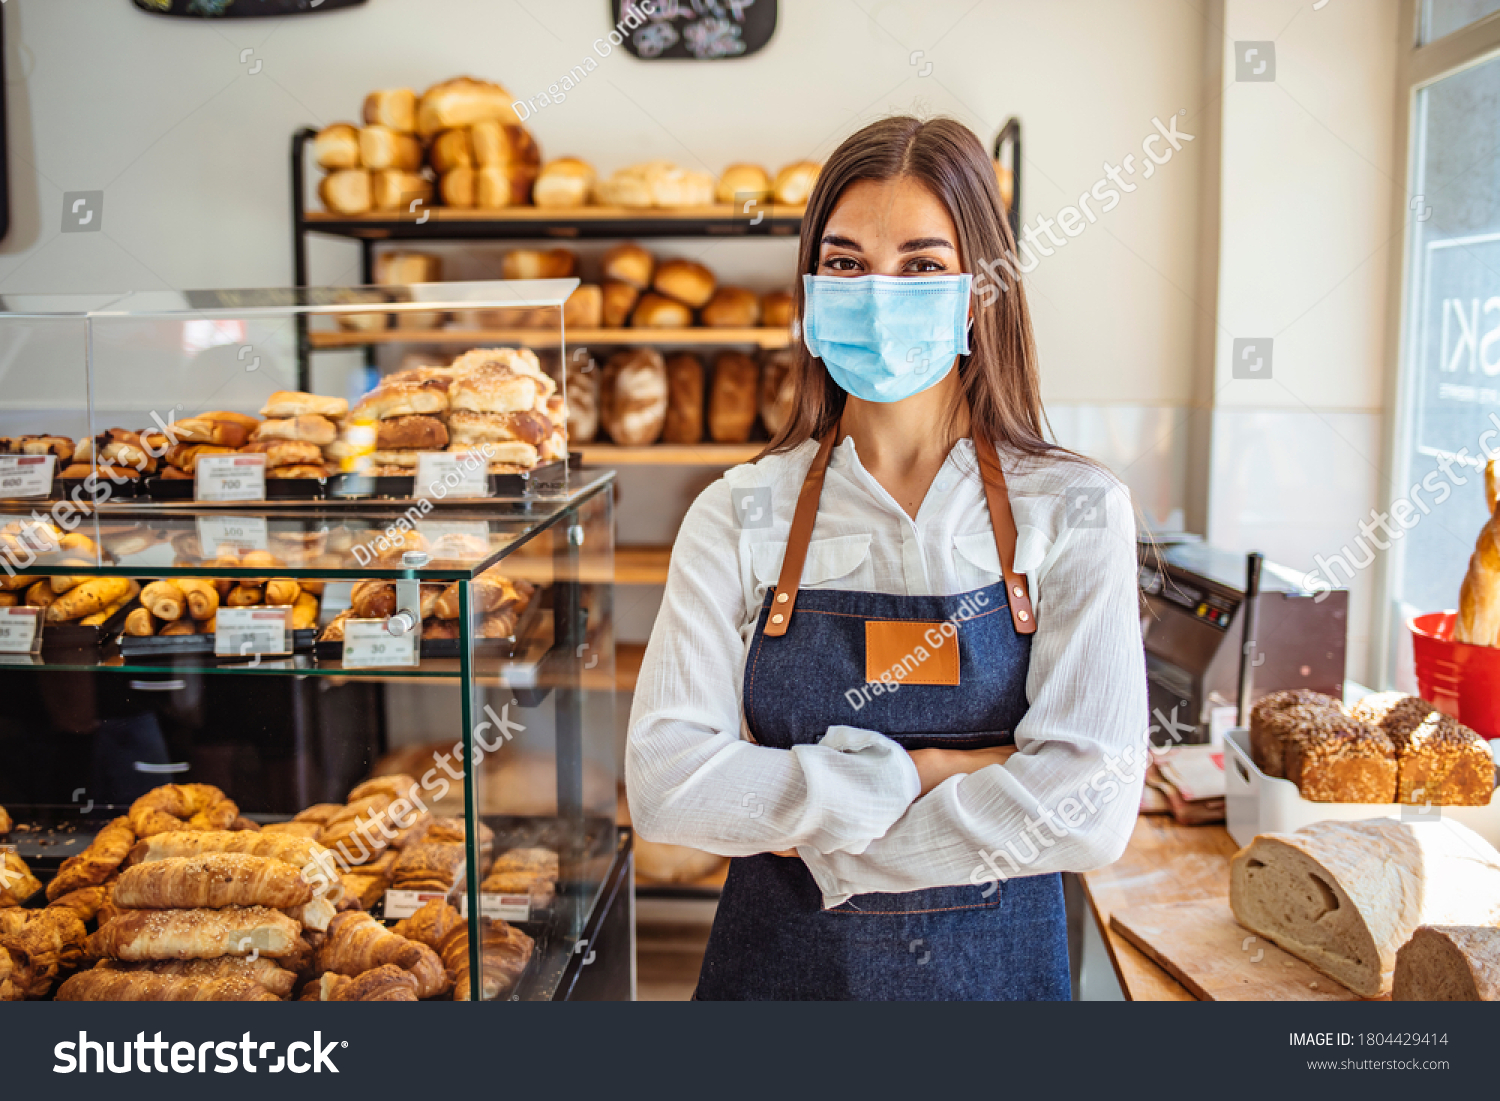 Woman working at a bakery wearing a facemask to avoid the coronavirus. COVID-19 lifestyle concepts. Day in the life of owners of bakery shop with the protocol against the Covid-19 in place.  #1804429414